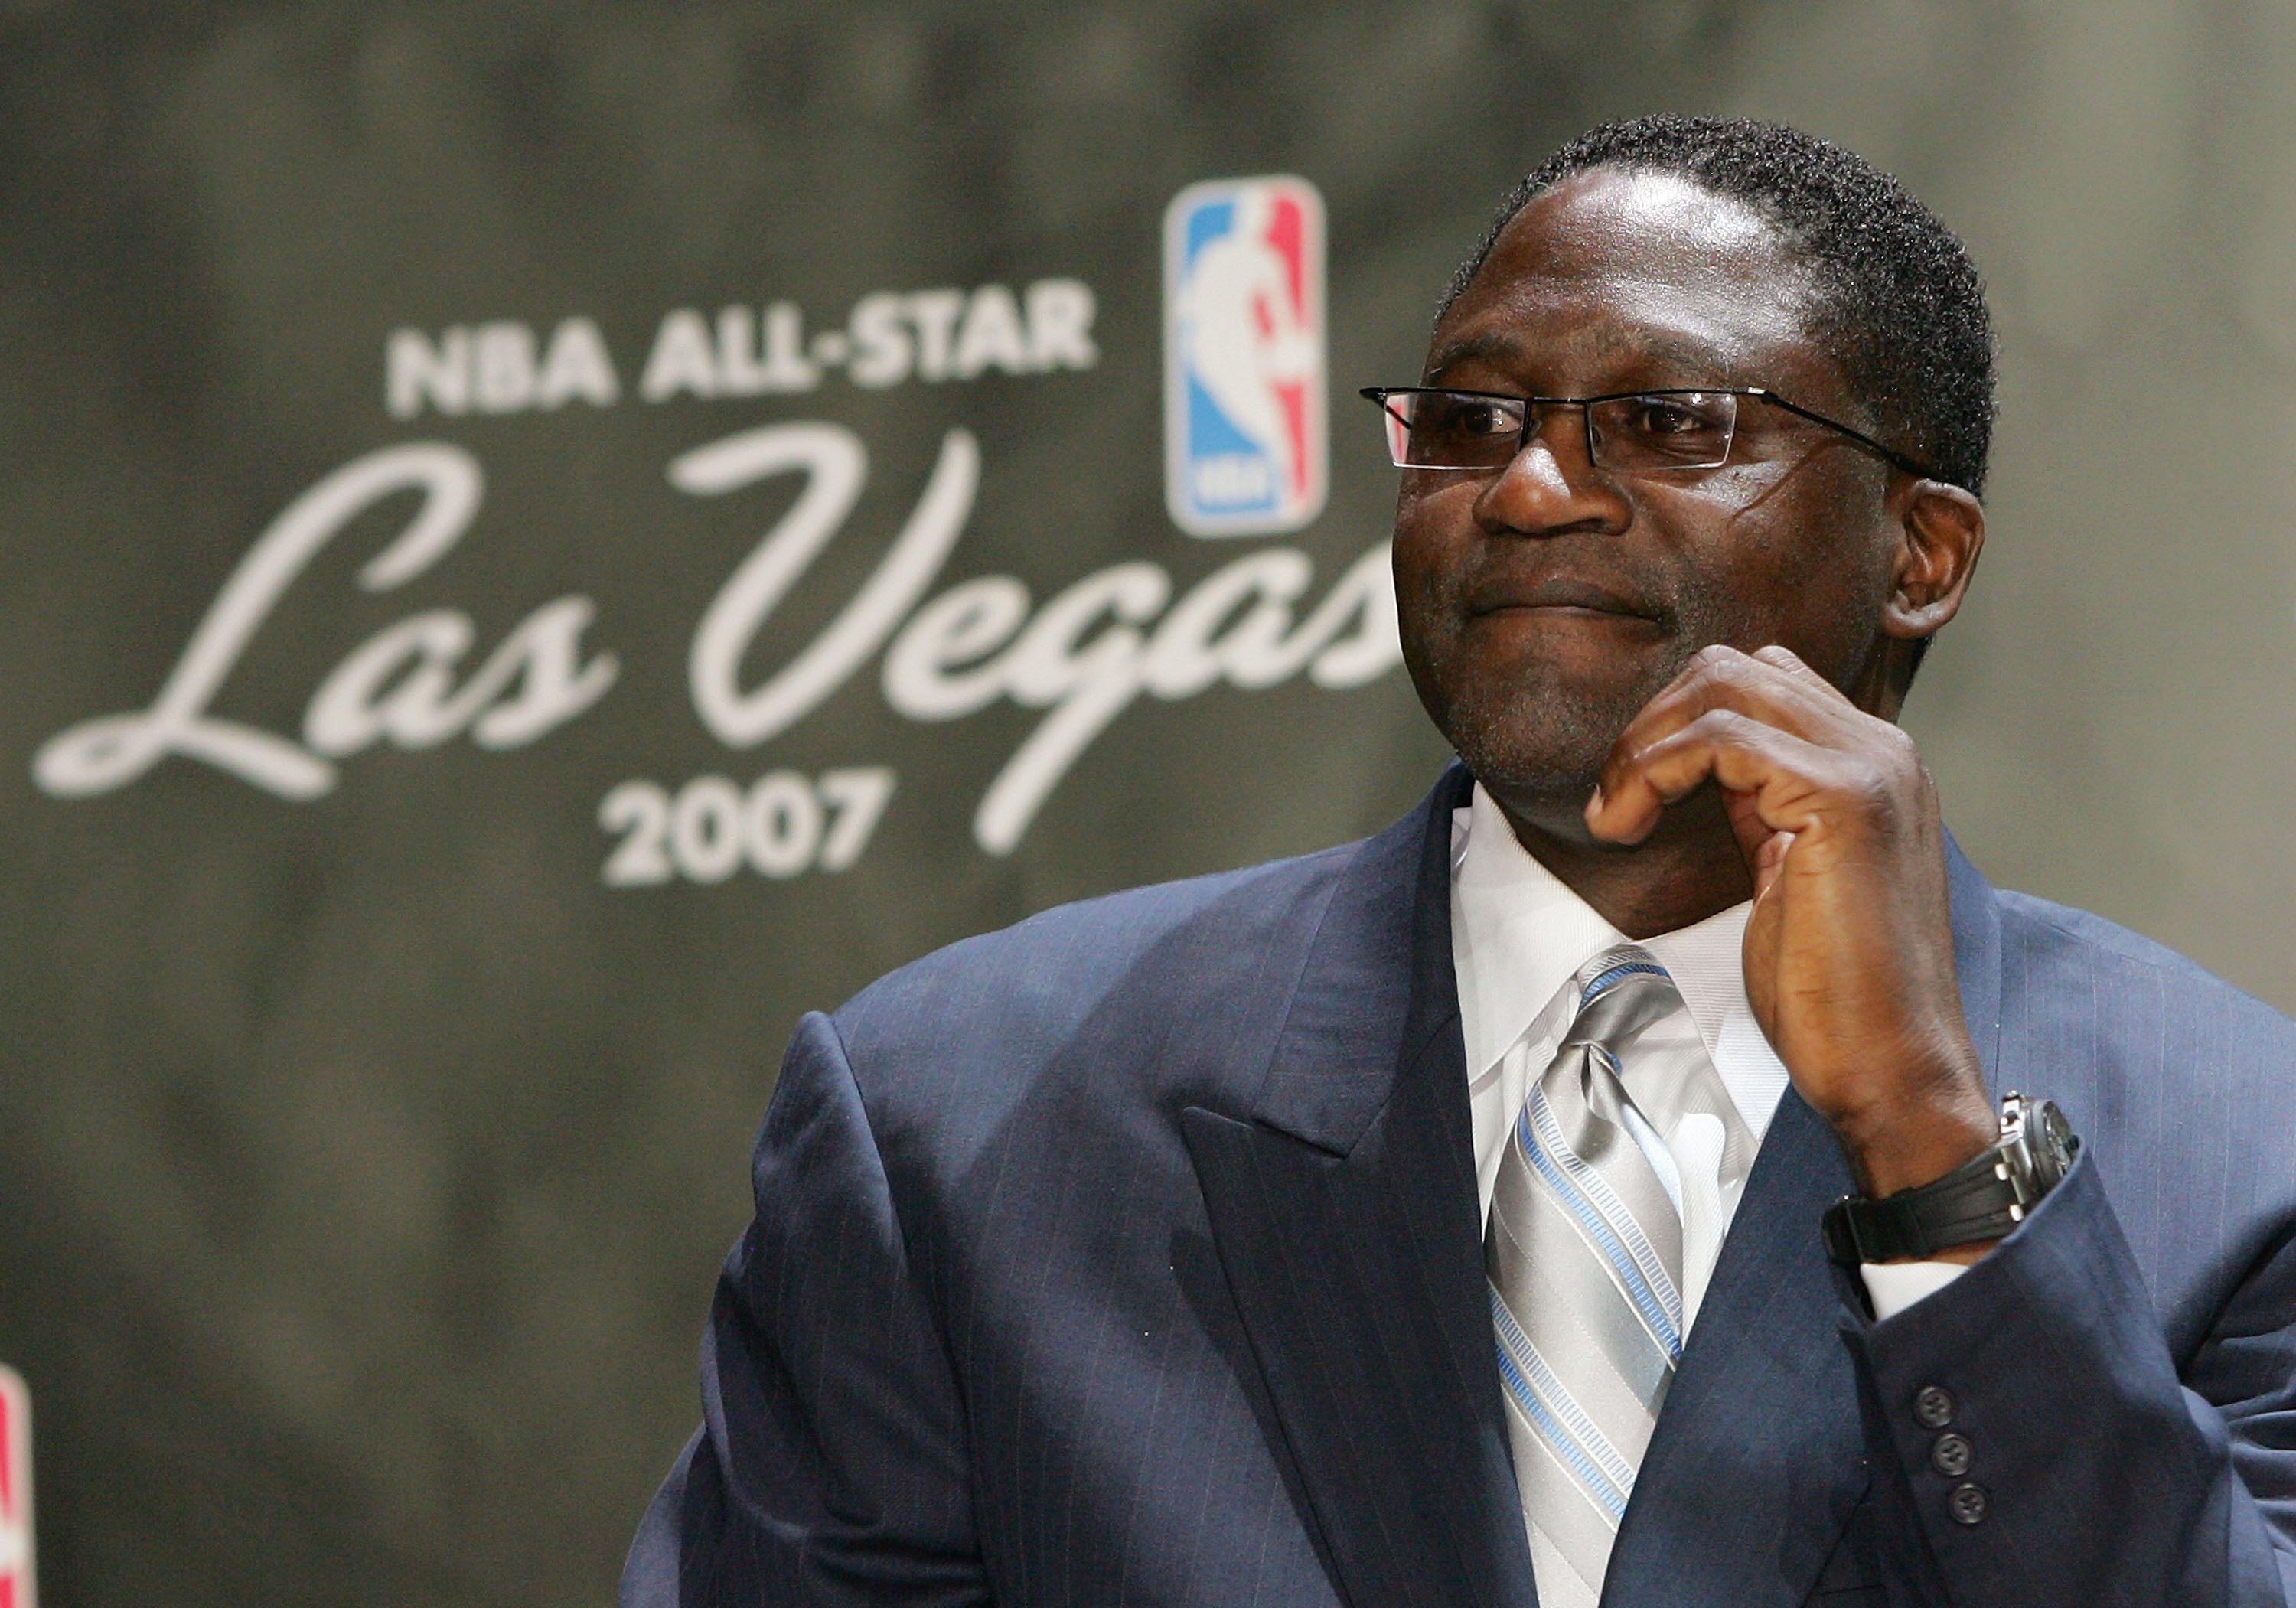 LAS VEGAS - APRIL 20:  2006 NBA Hall of Fame inductee Dominique Wilkins listens during a ceremony held to unveil the logo for the 2007 NBA All-Star Game at the Fashion Show Mall April 20, 2006 in Las Vegas, Nevada. The game will be held February 18, 2007,